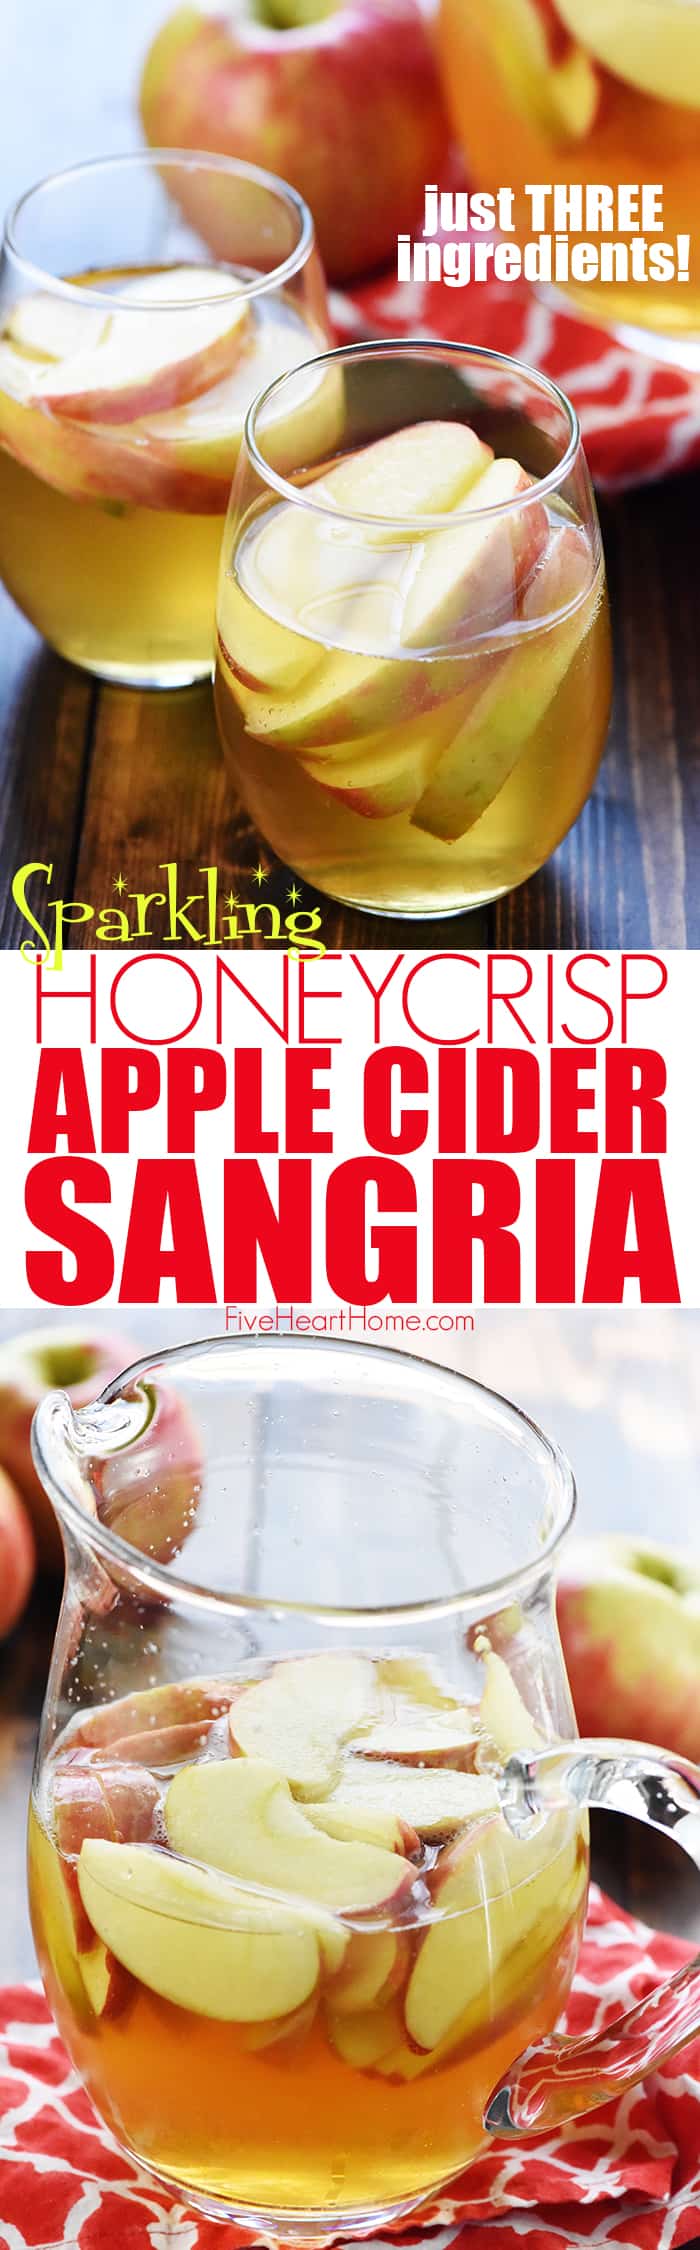 Sparkling Apple Cider Sangria Fivehearthome,How To Play Gin Rummy With 2 Players